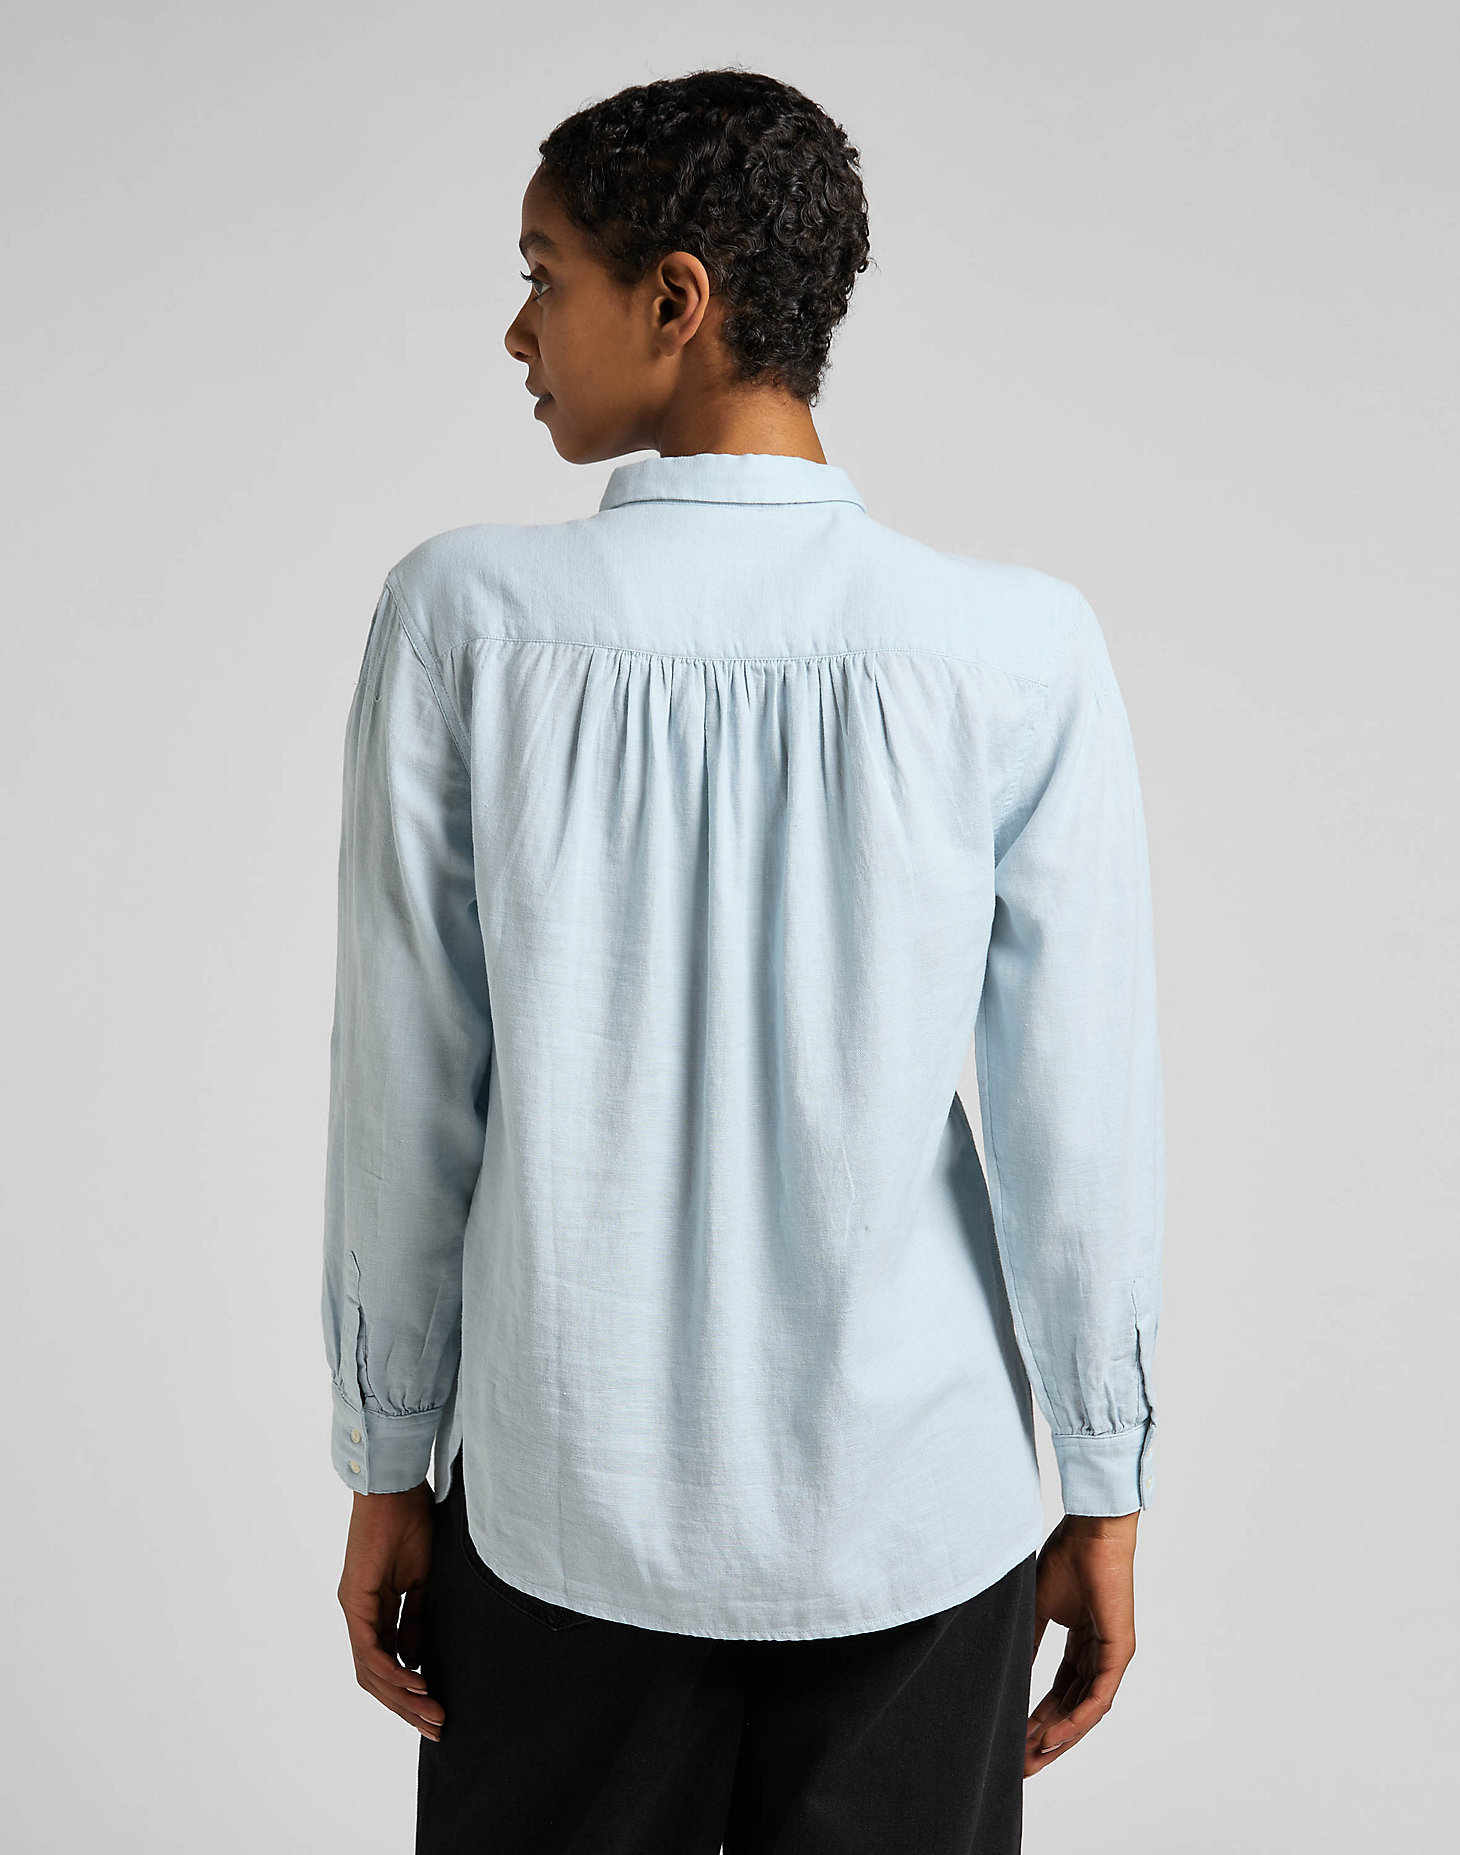 Pintucked Relaxed Blouse in Shy Blue alternative view 1